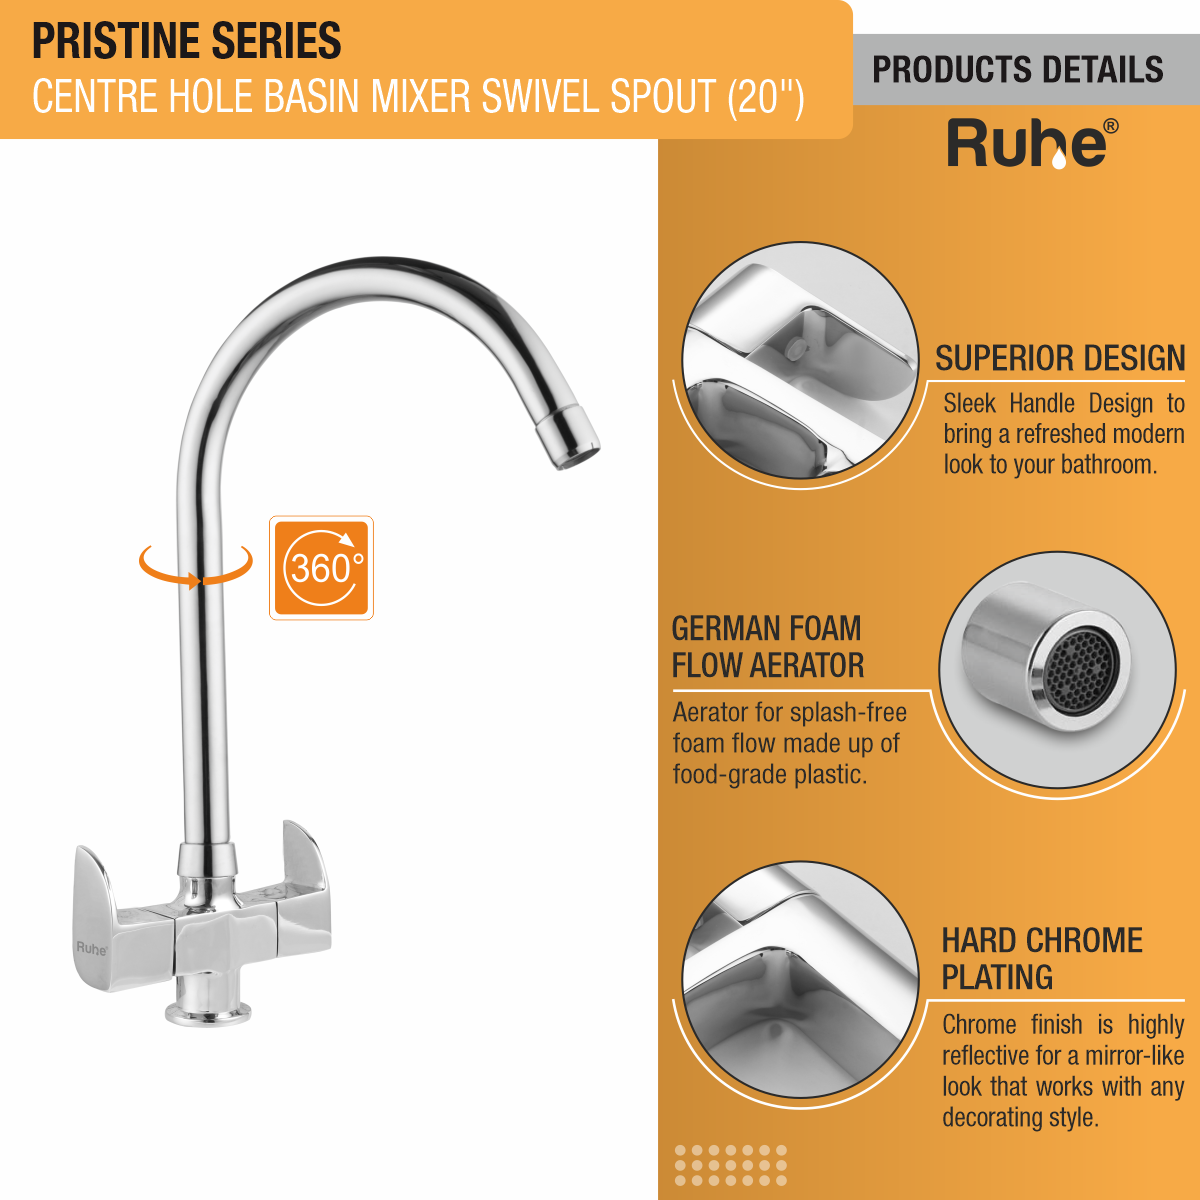 Pristine Centre Hole Basin Mixer with Large (20 inches) Round Swivel Spout Faucet product details